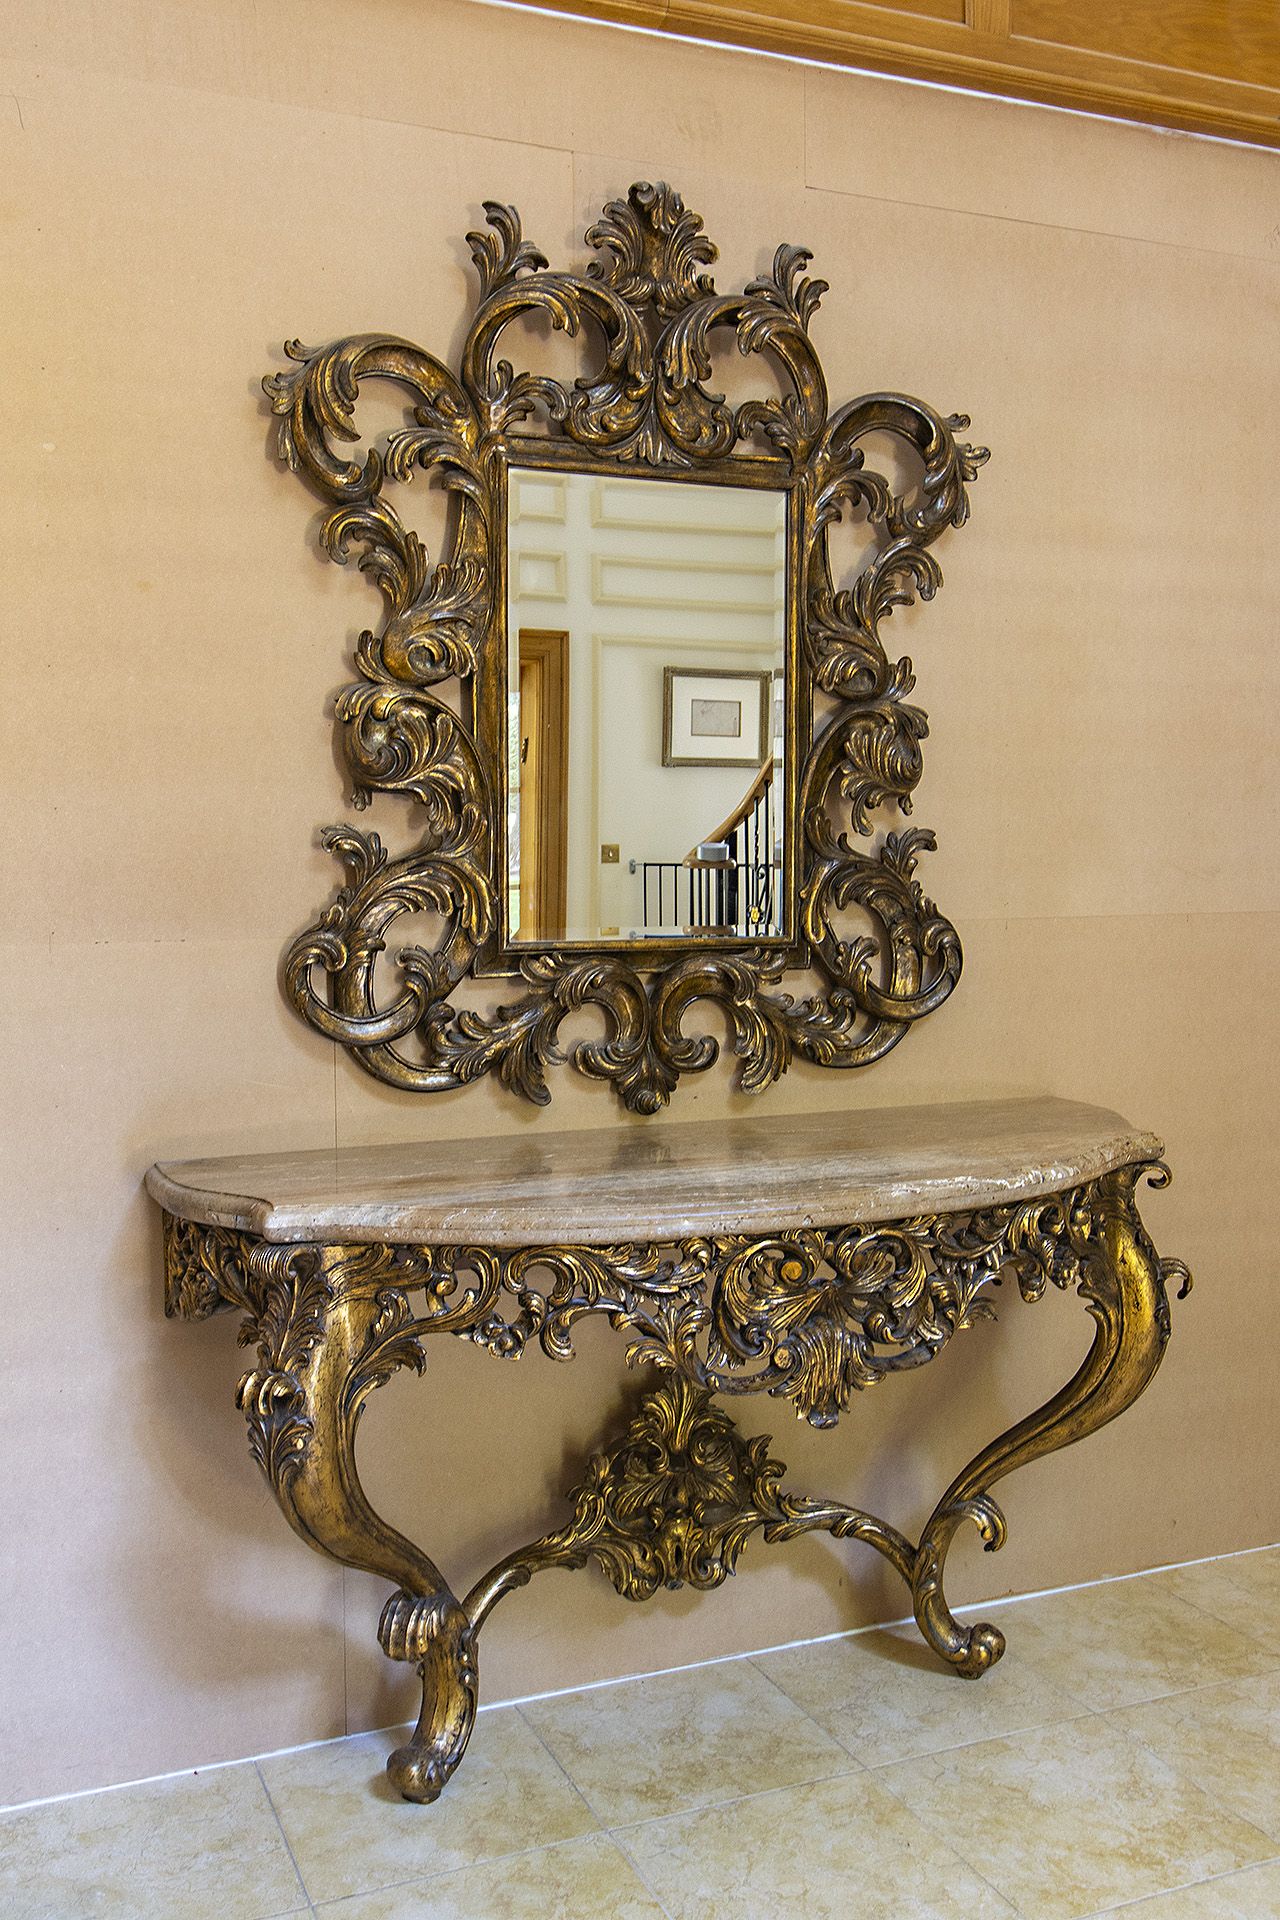 Christpher Guy Cederic Mirror Handcarved solid hardwood and hand-applied finishes bombato border - Image 6 of 6